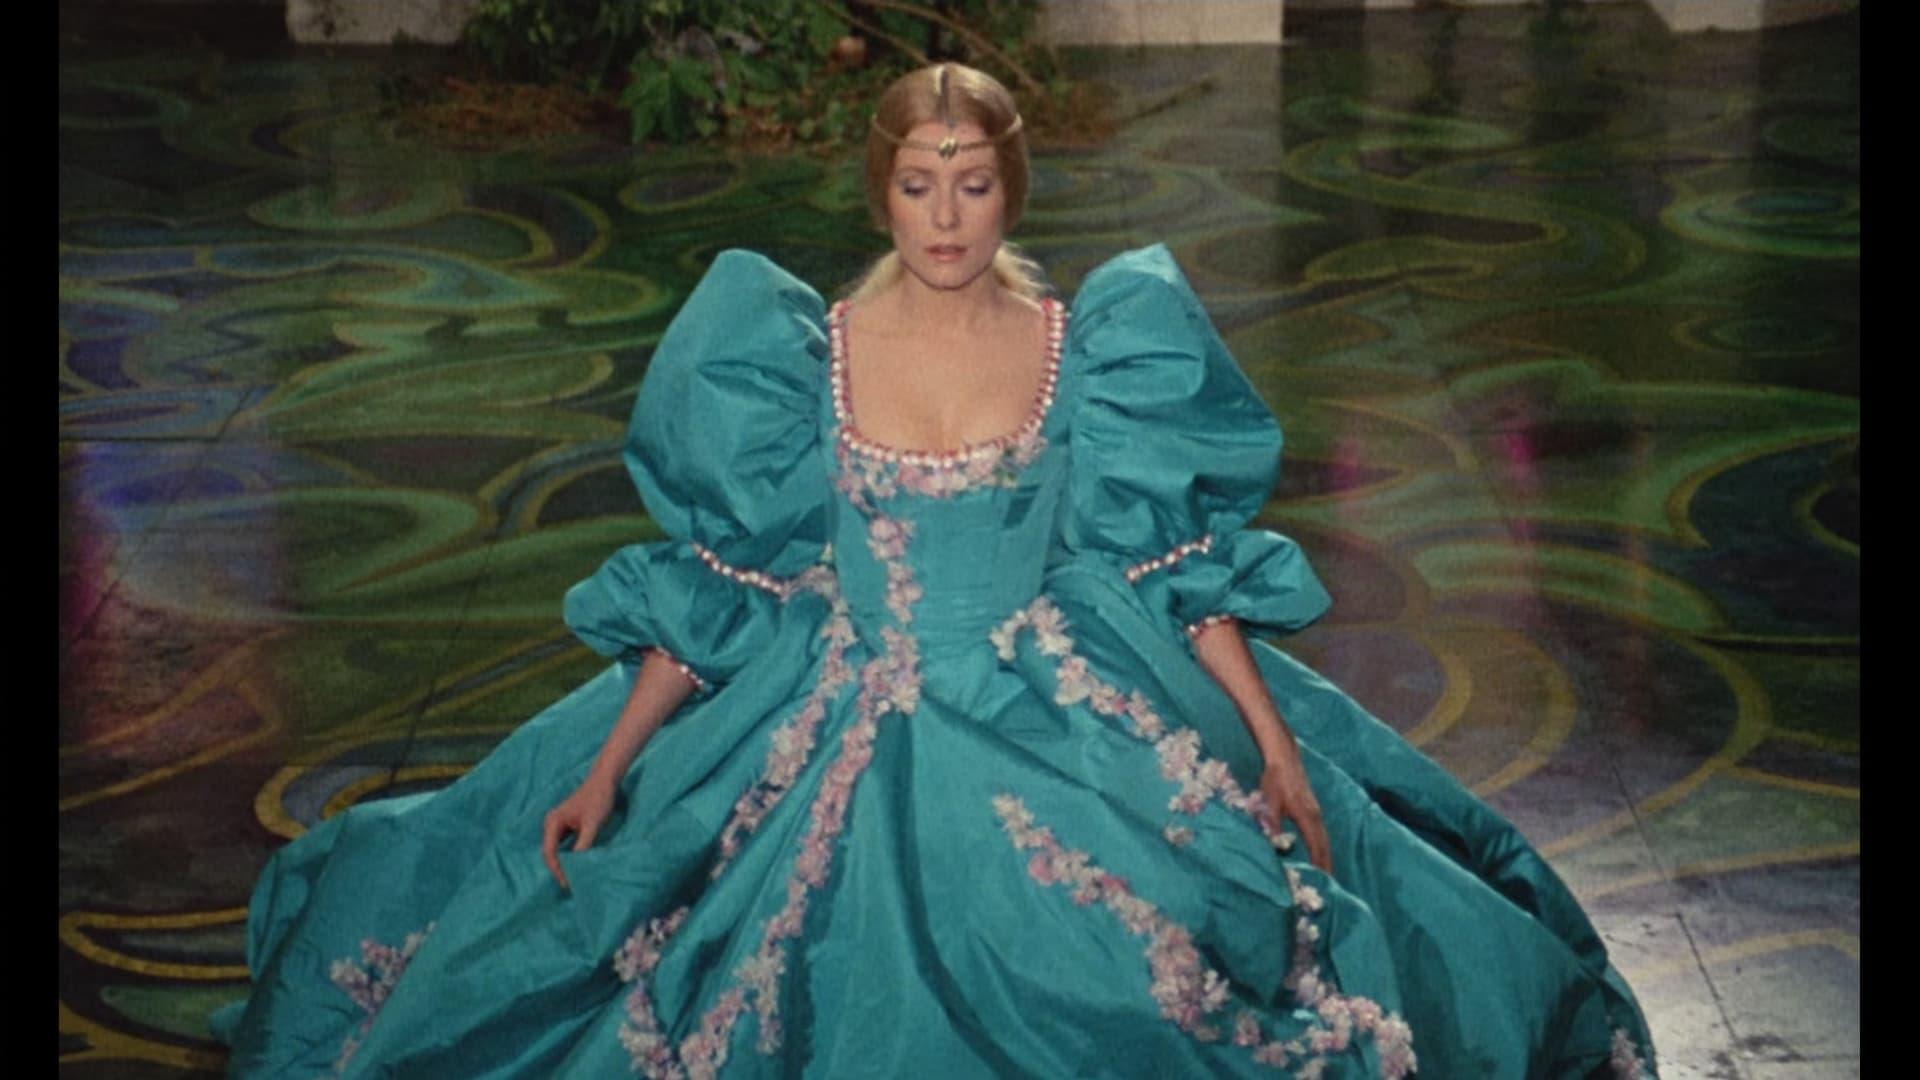 The World of Jacques Demy backdrop